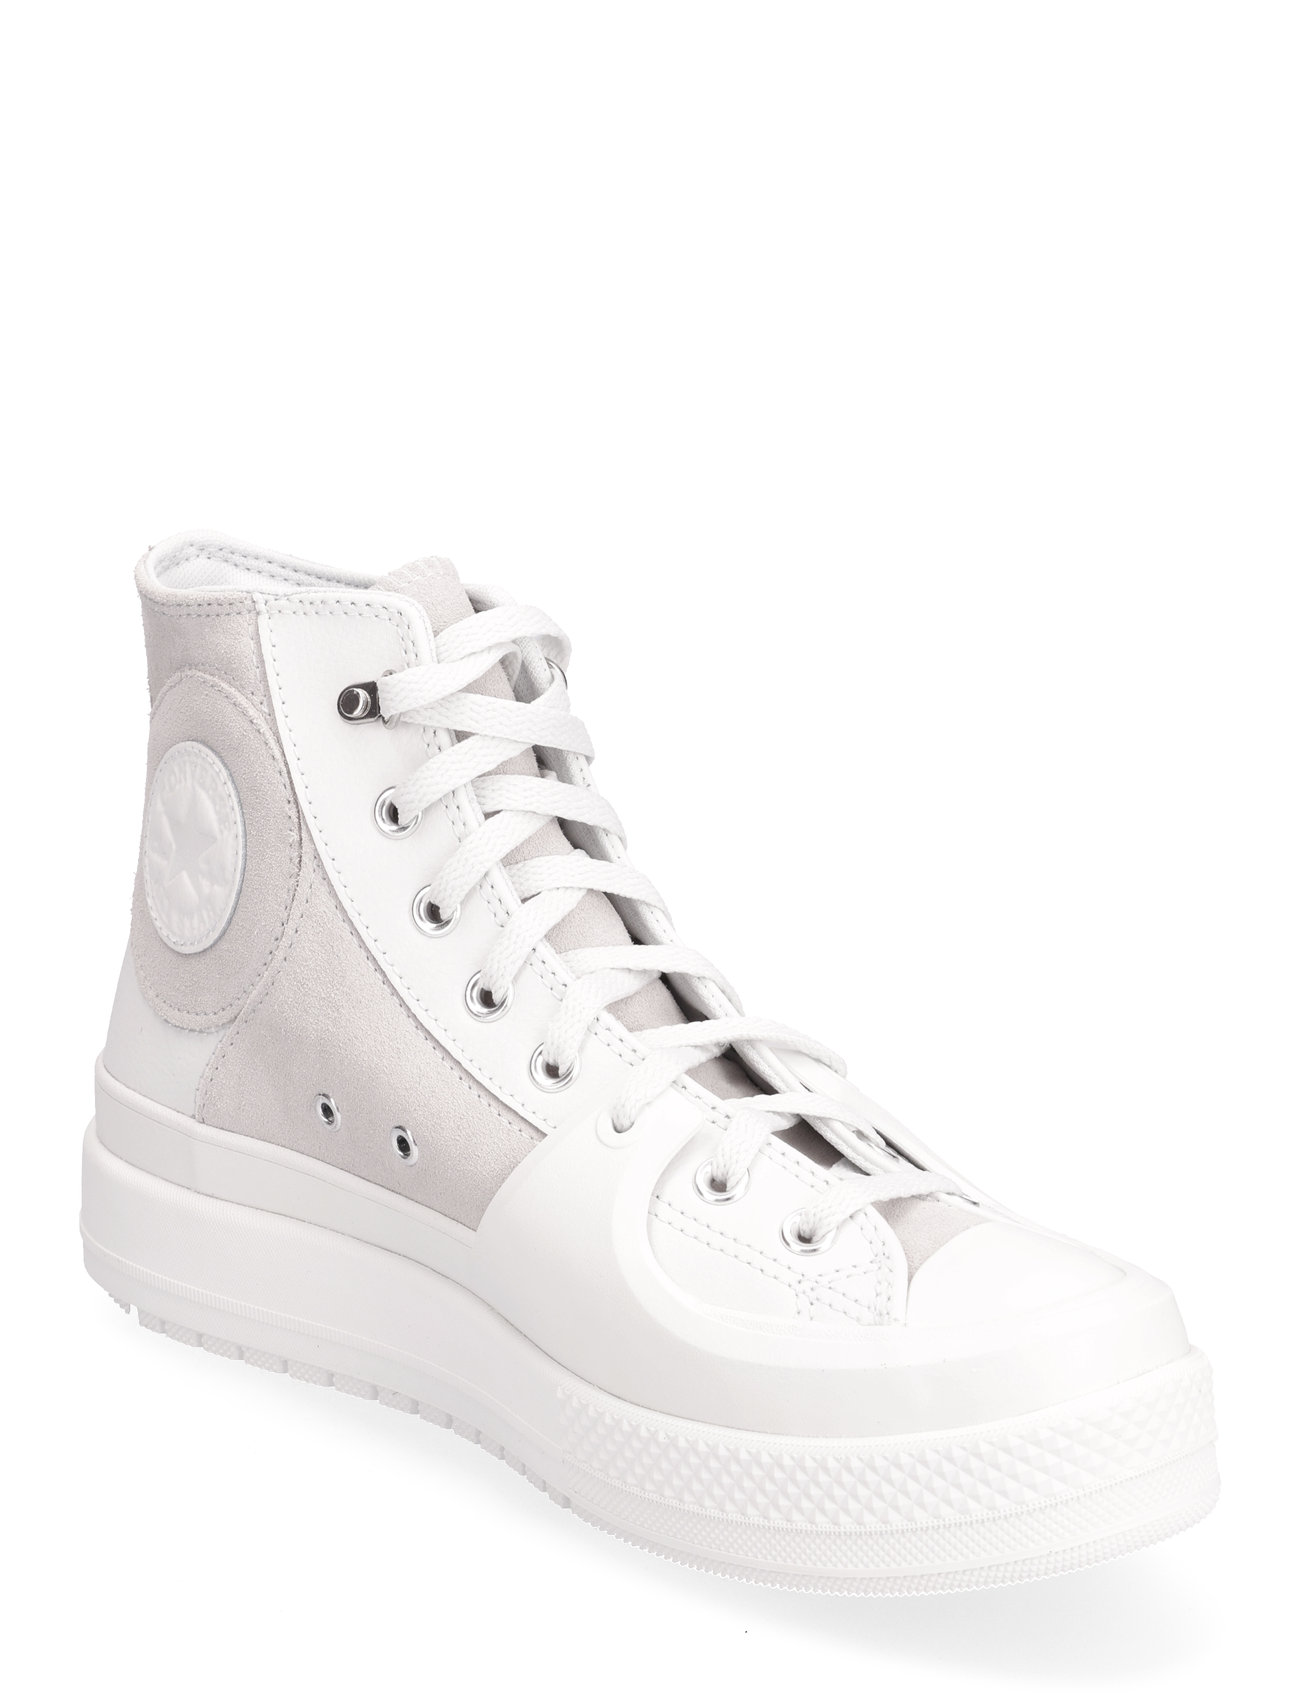 Converse "Chuck Taylor All Star Construct Sport Sneakers High-top White Converse"